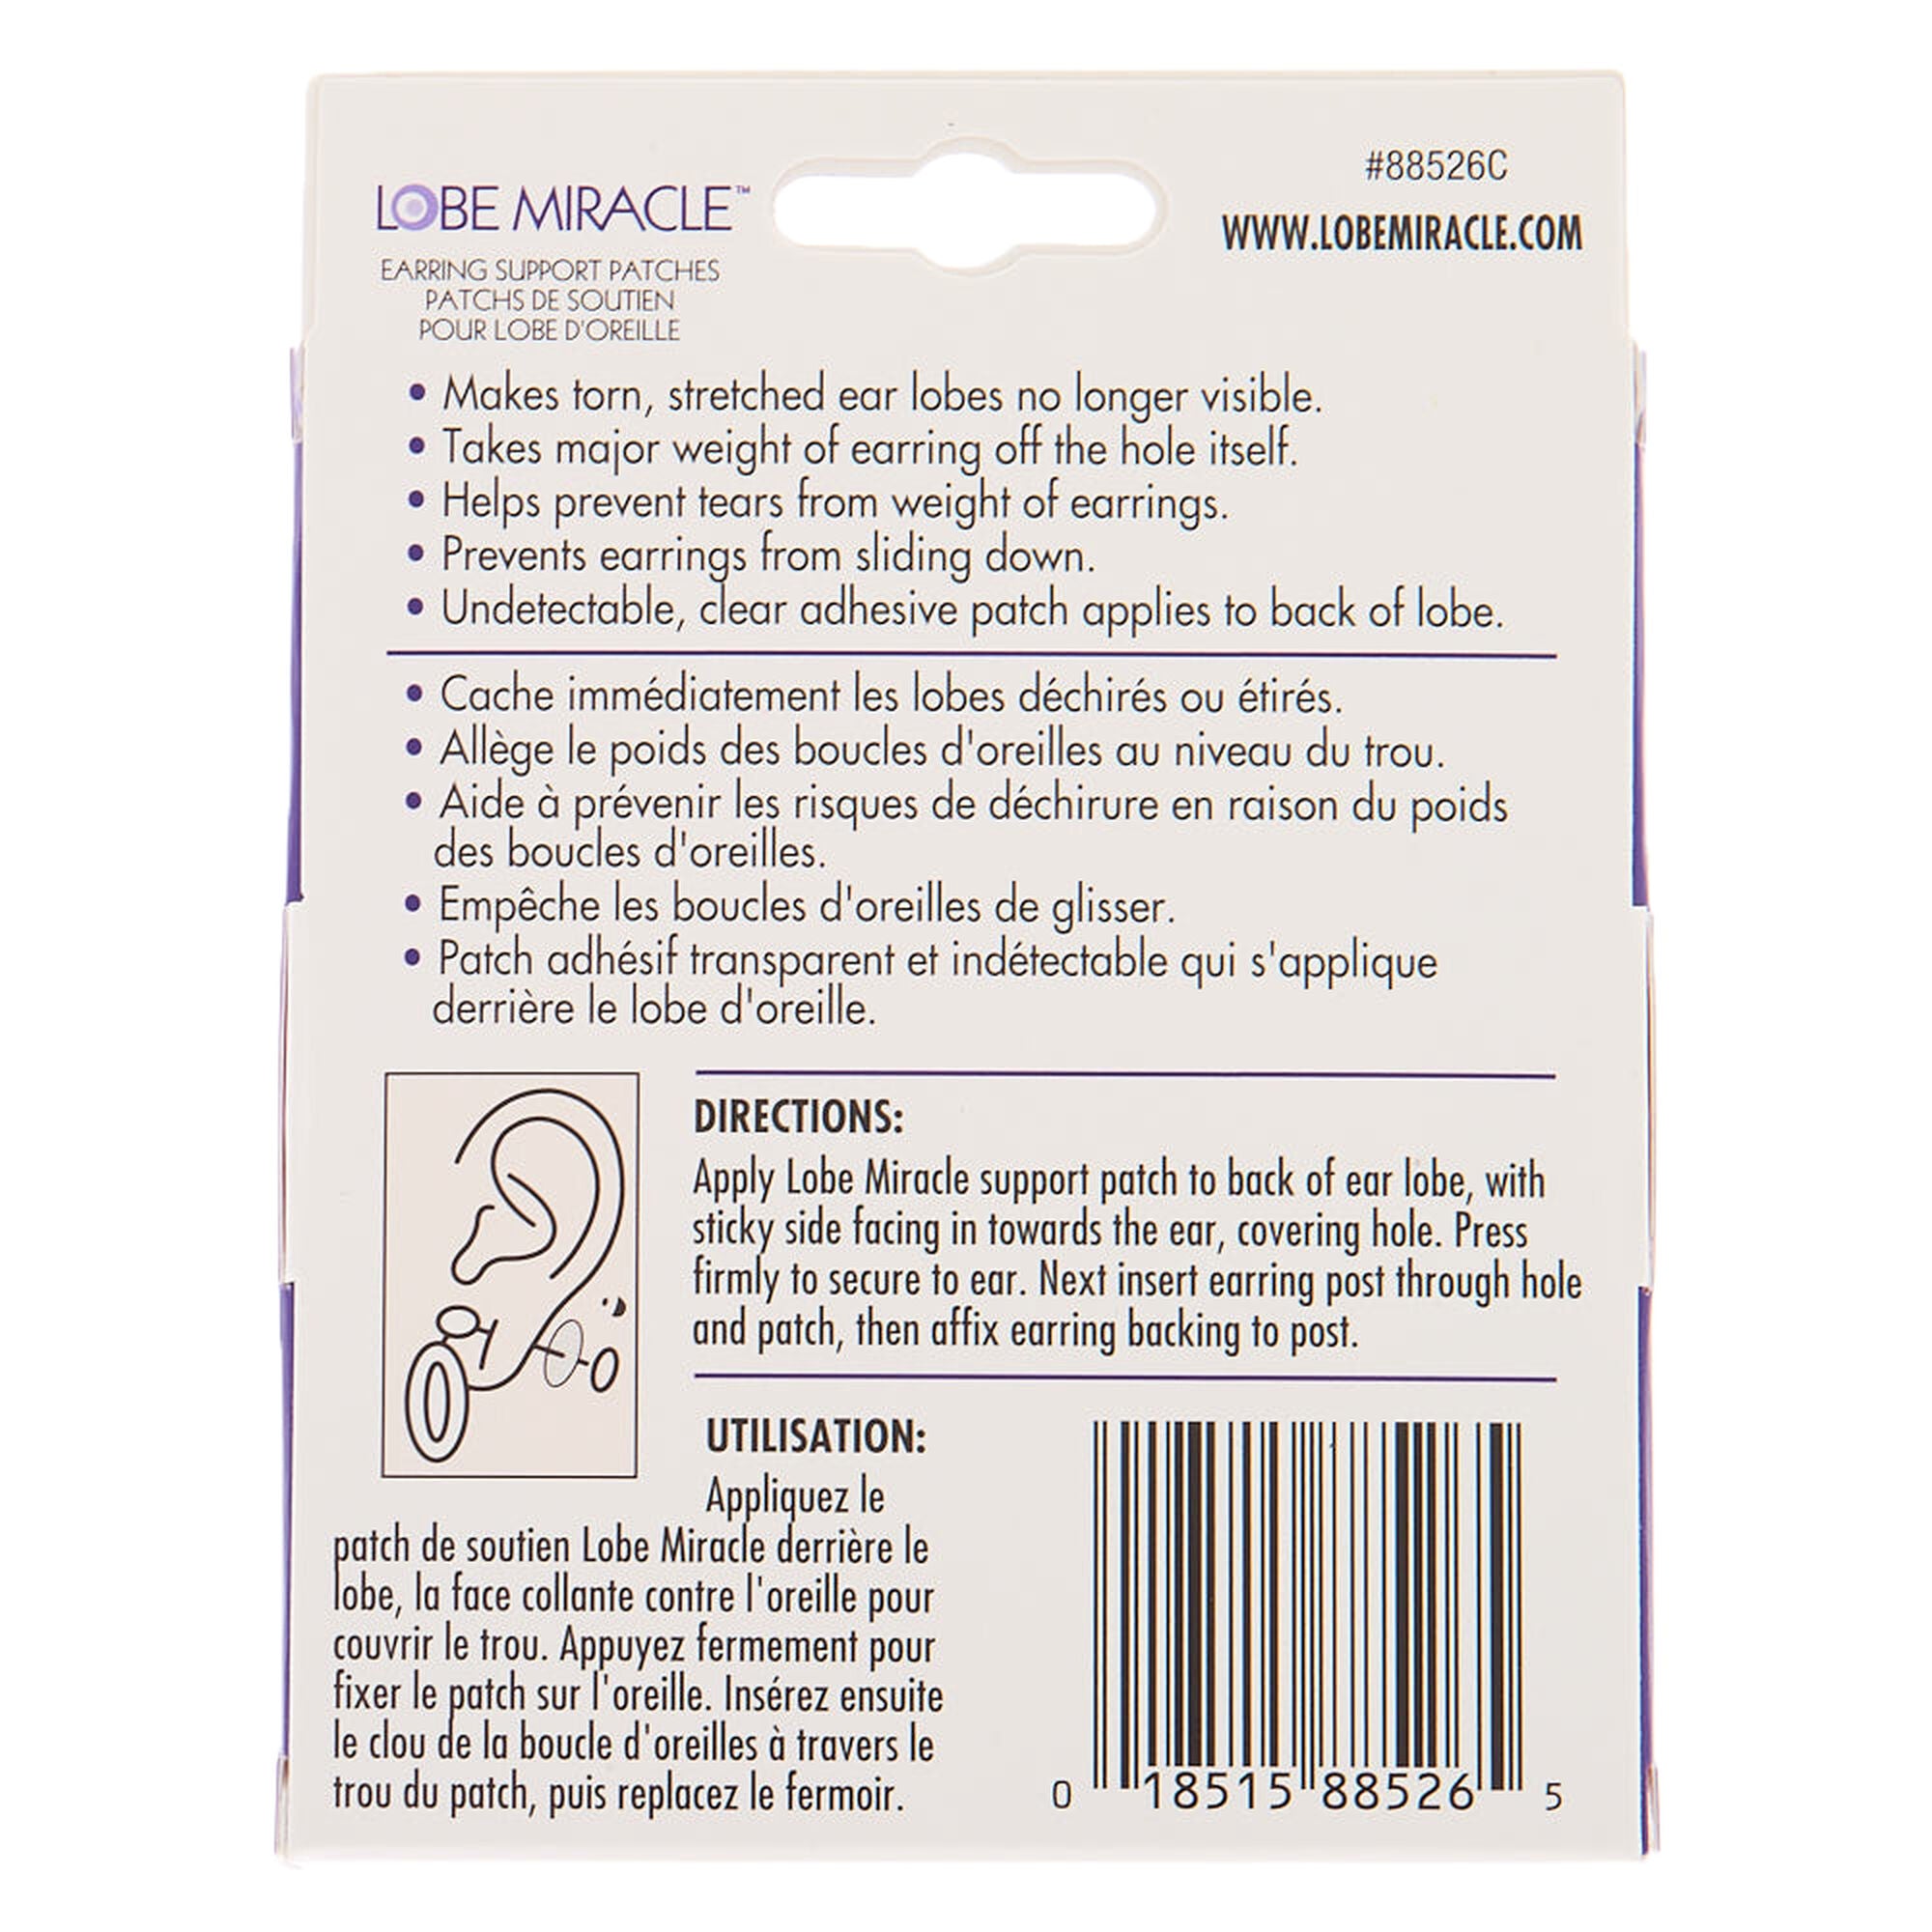 Buy LOBE MIRACLE Ear Lobe Tape/Invisible Ear Lobe Support Patch